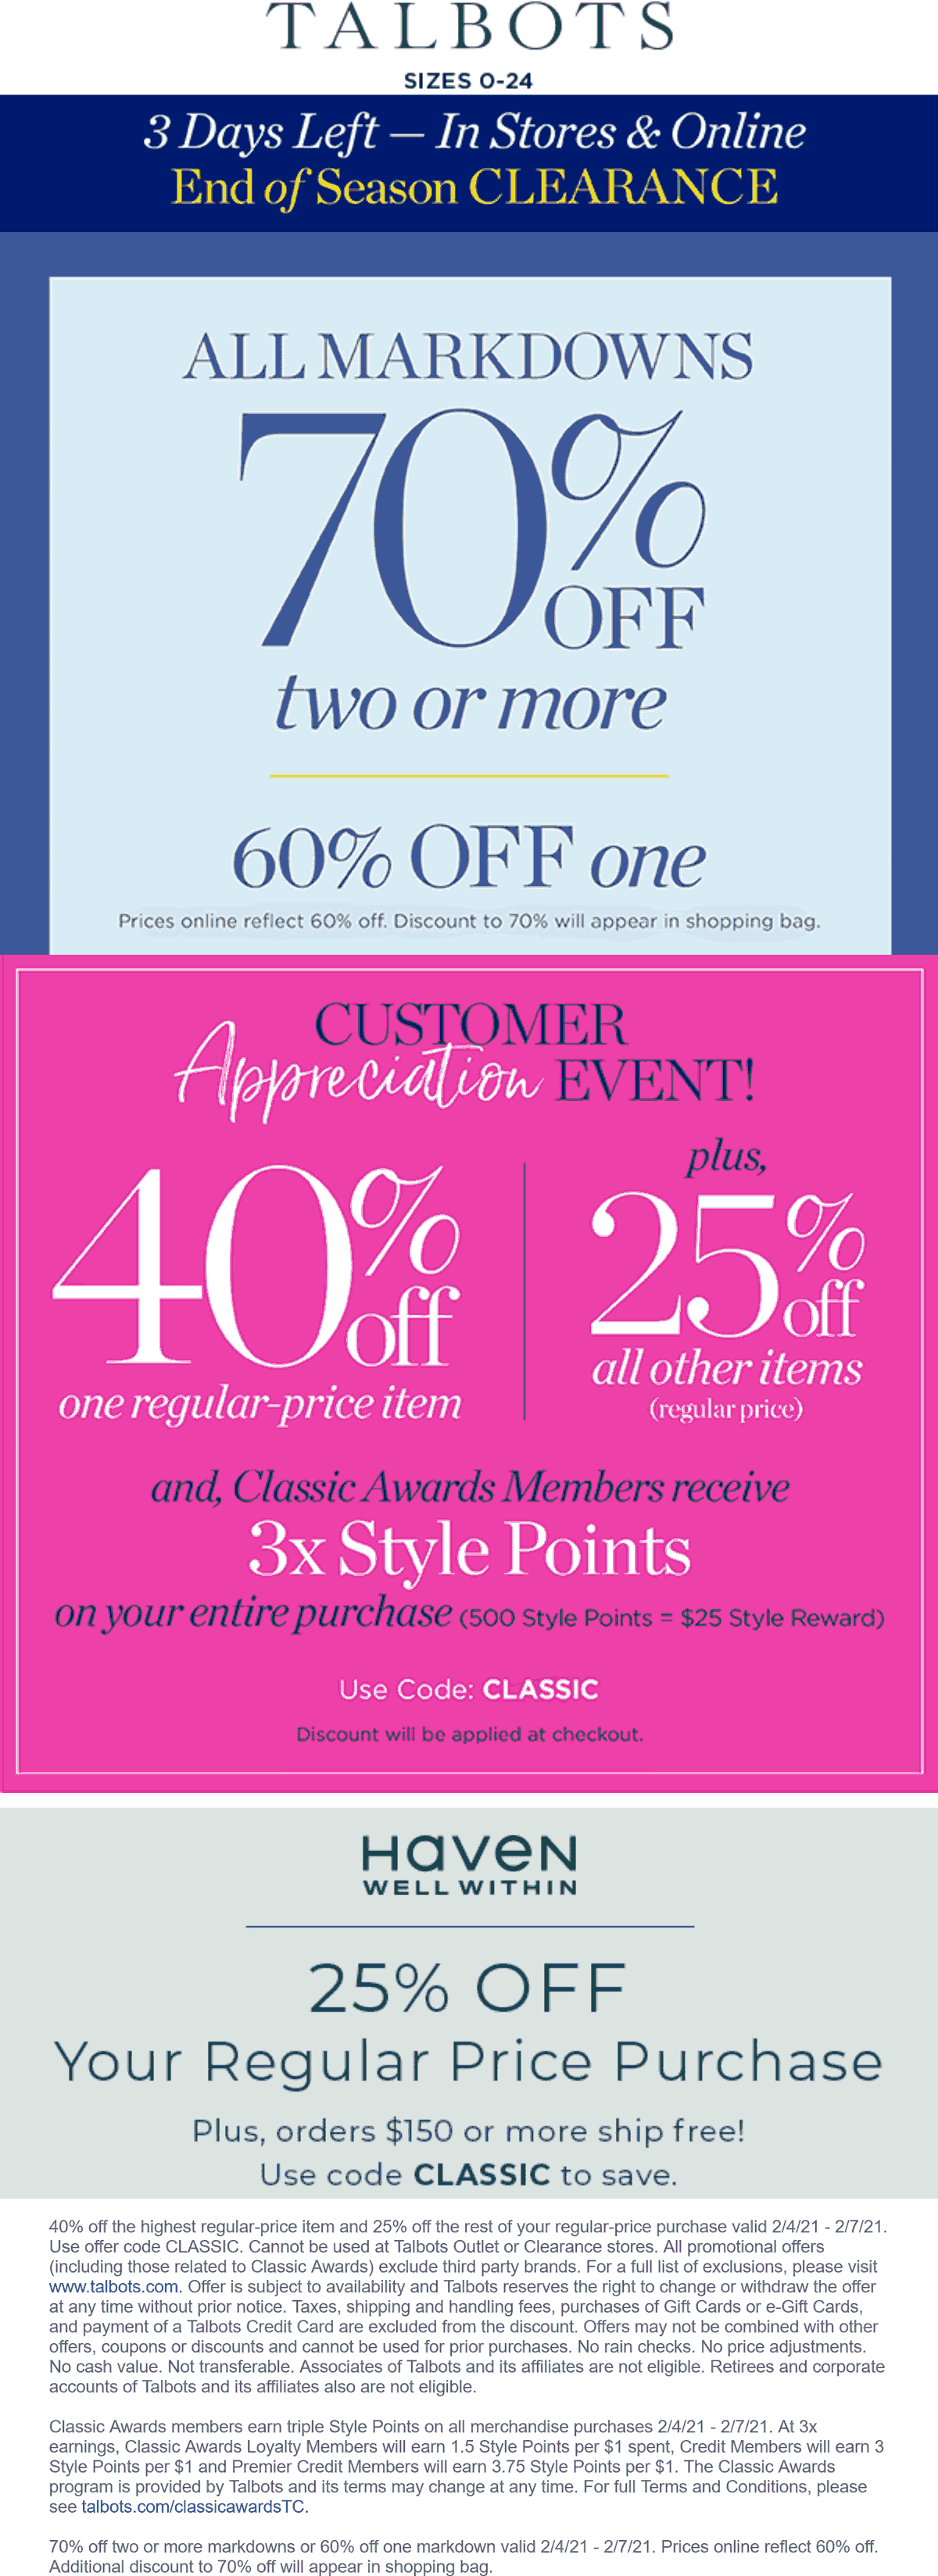 40 off a single item & more at Talbots, or online via promo code